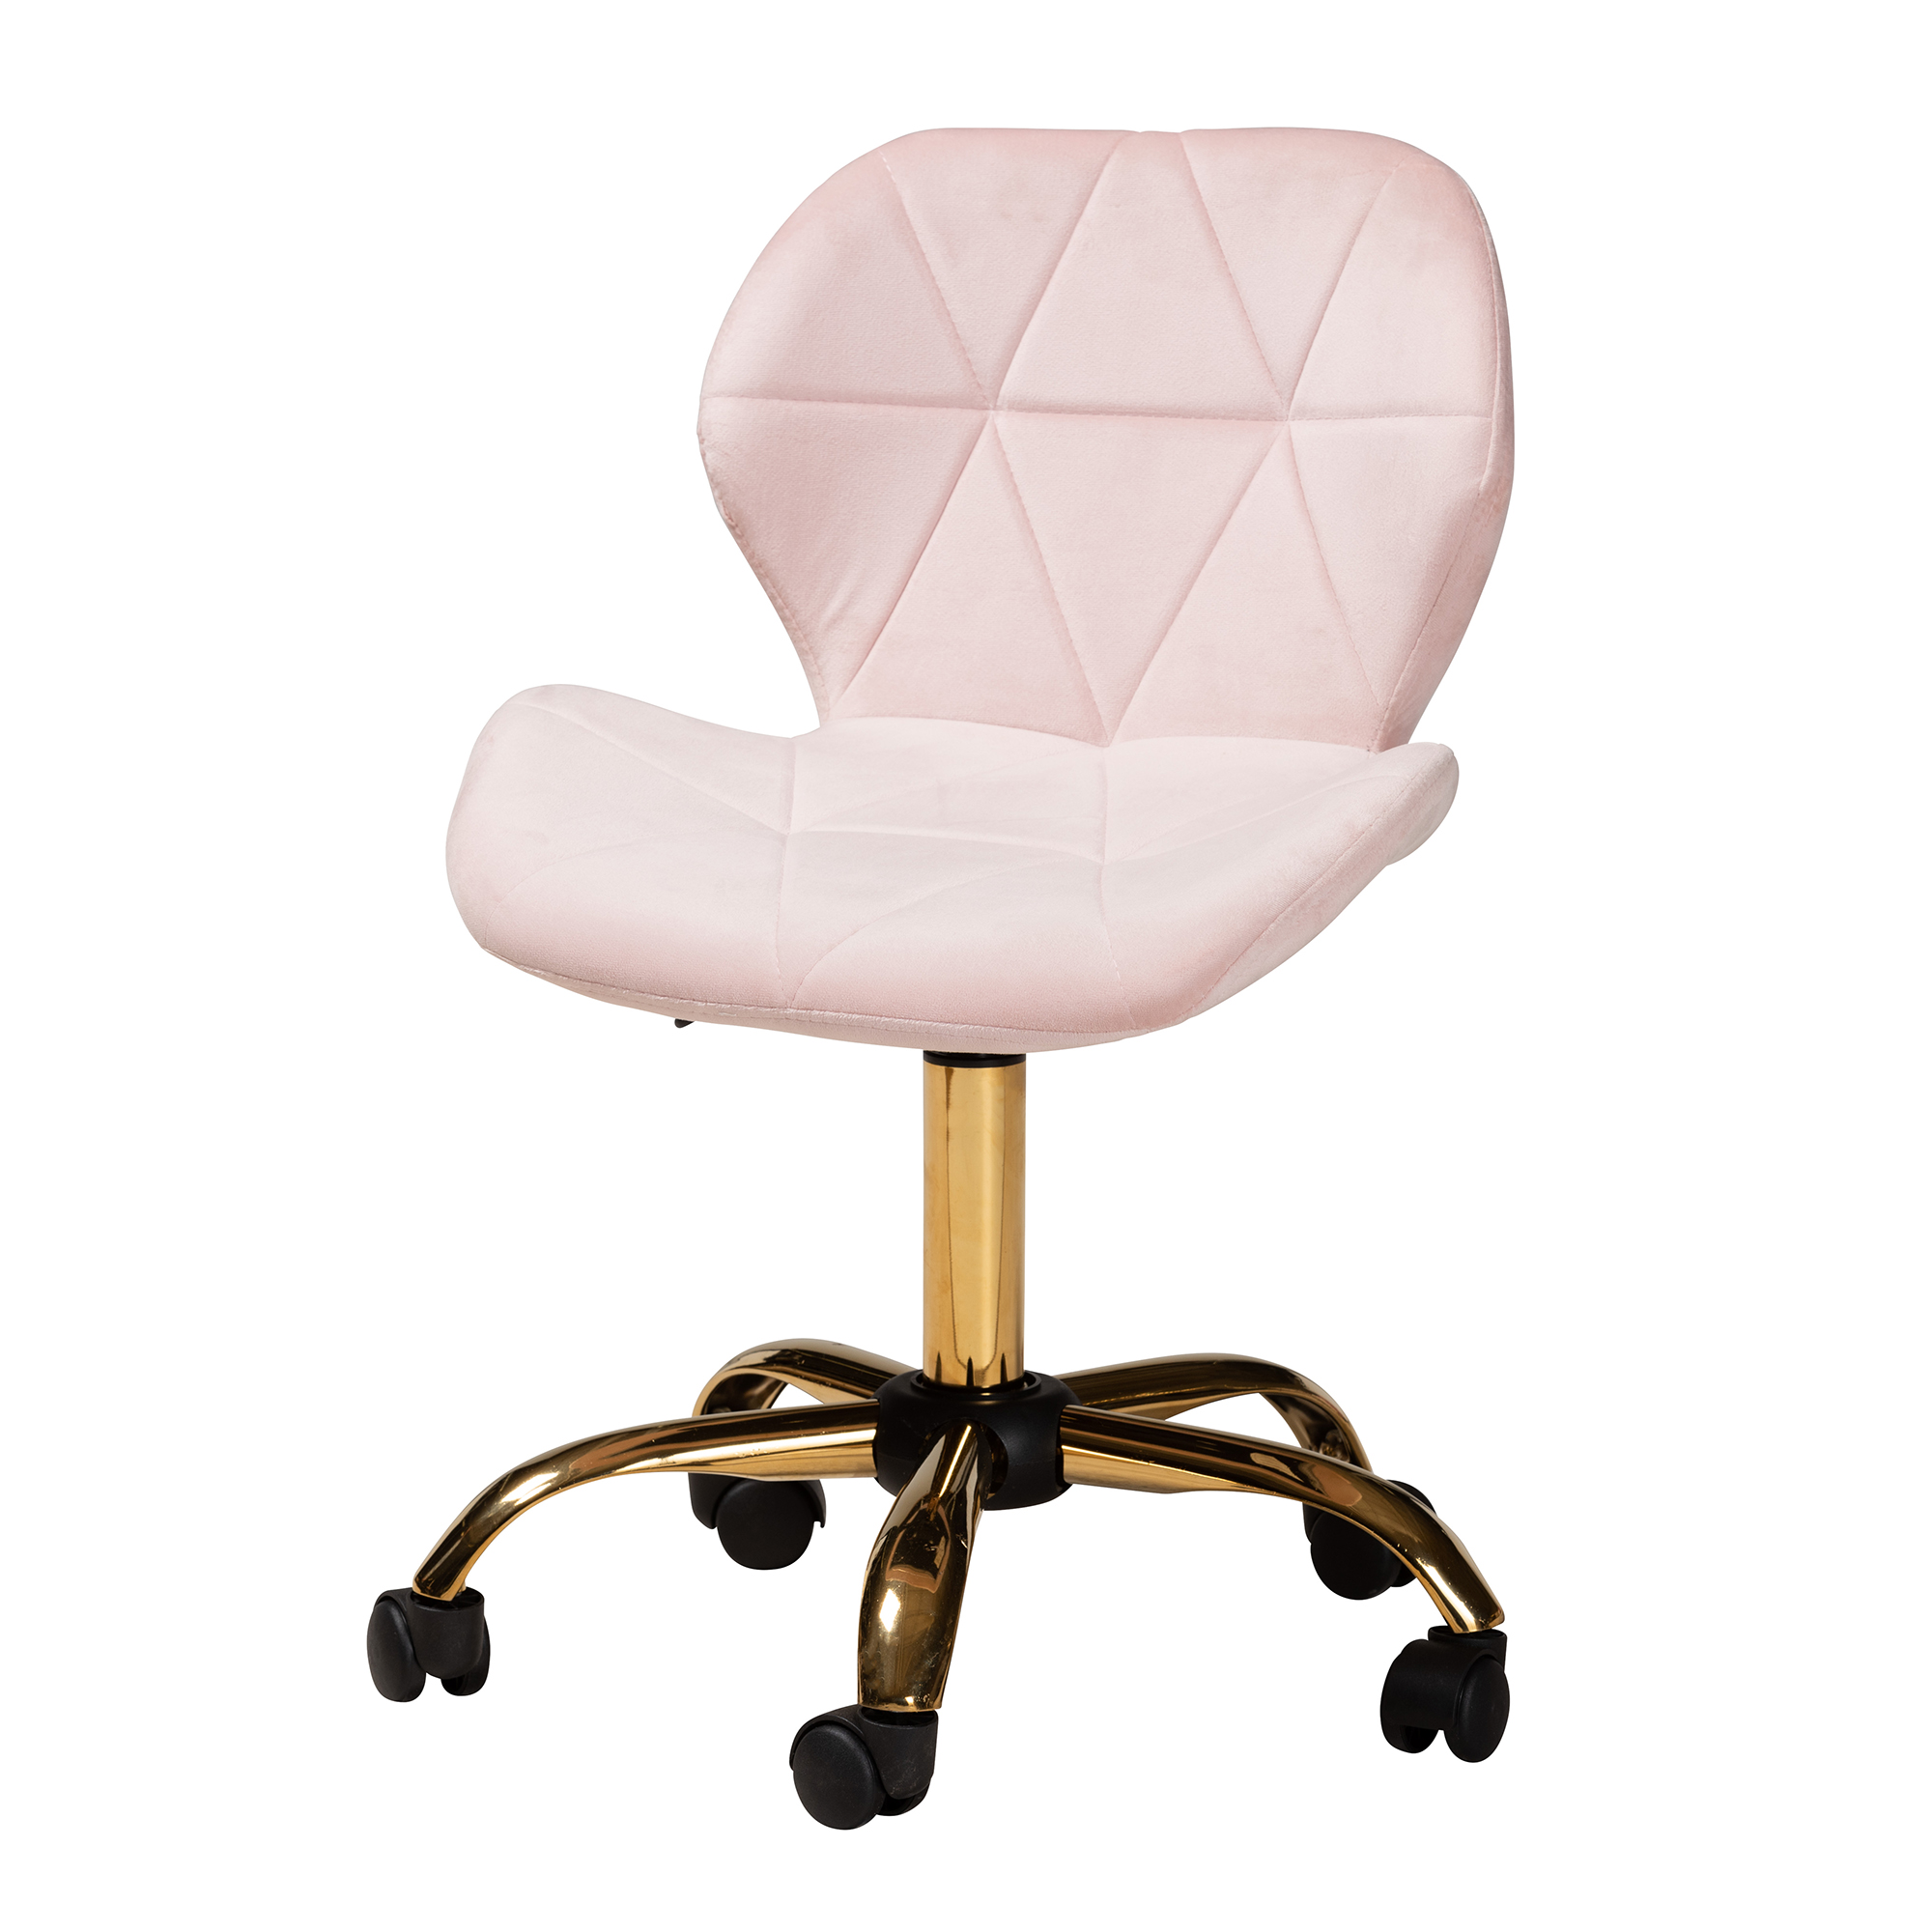 Baxton Studio Savara Contemporary Glam and Luxe Blush Pink Velvet Fabric and Gold Metal Swivel Office Chair